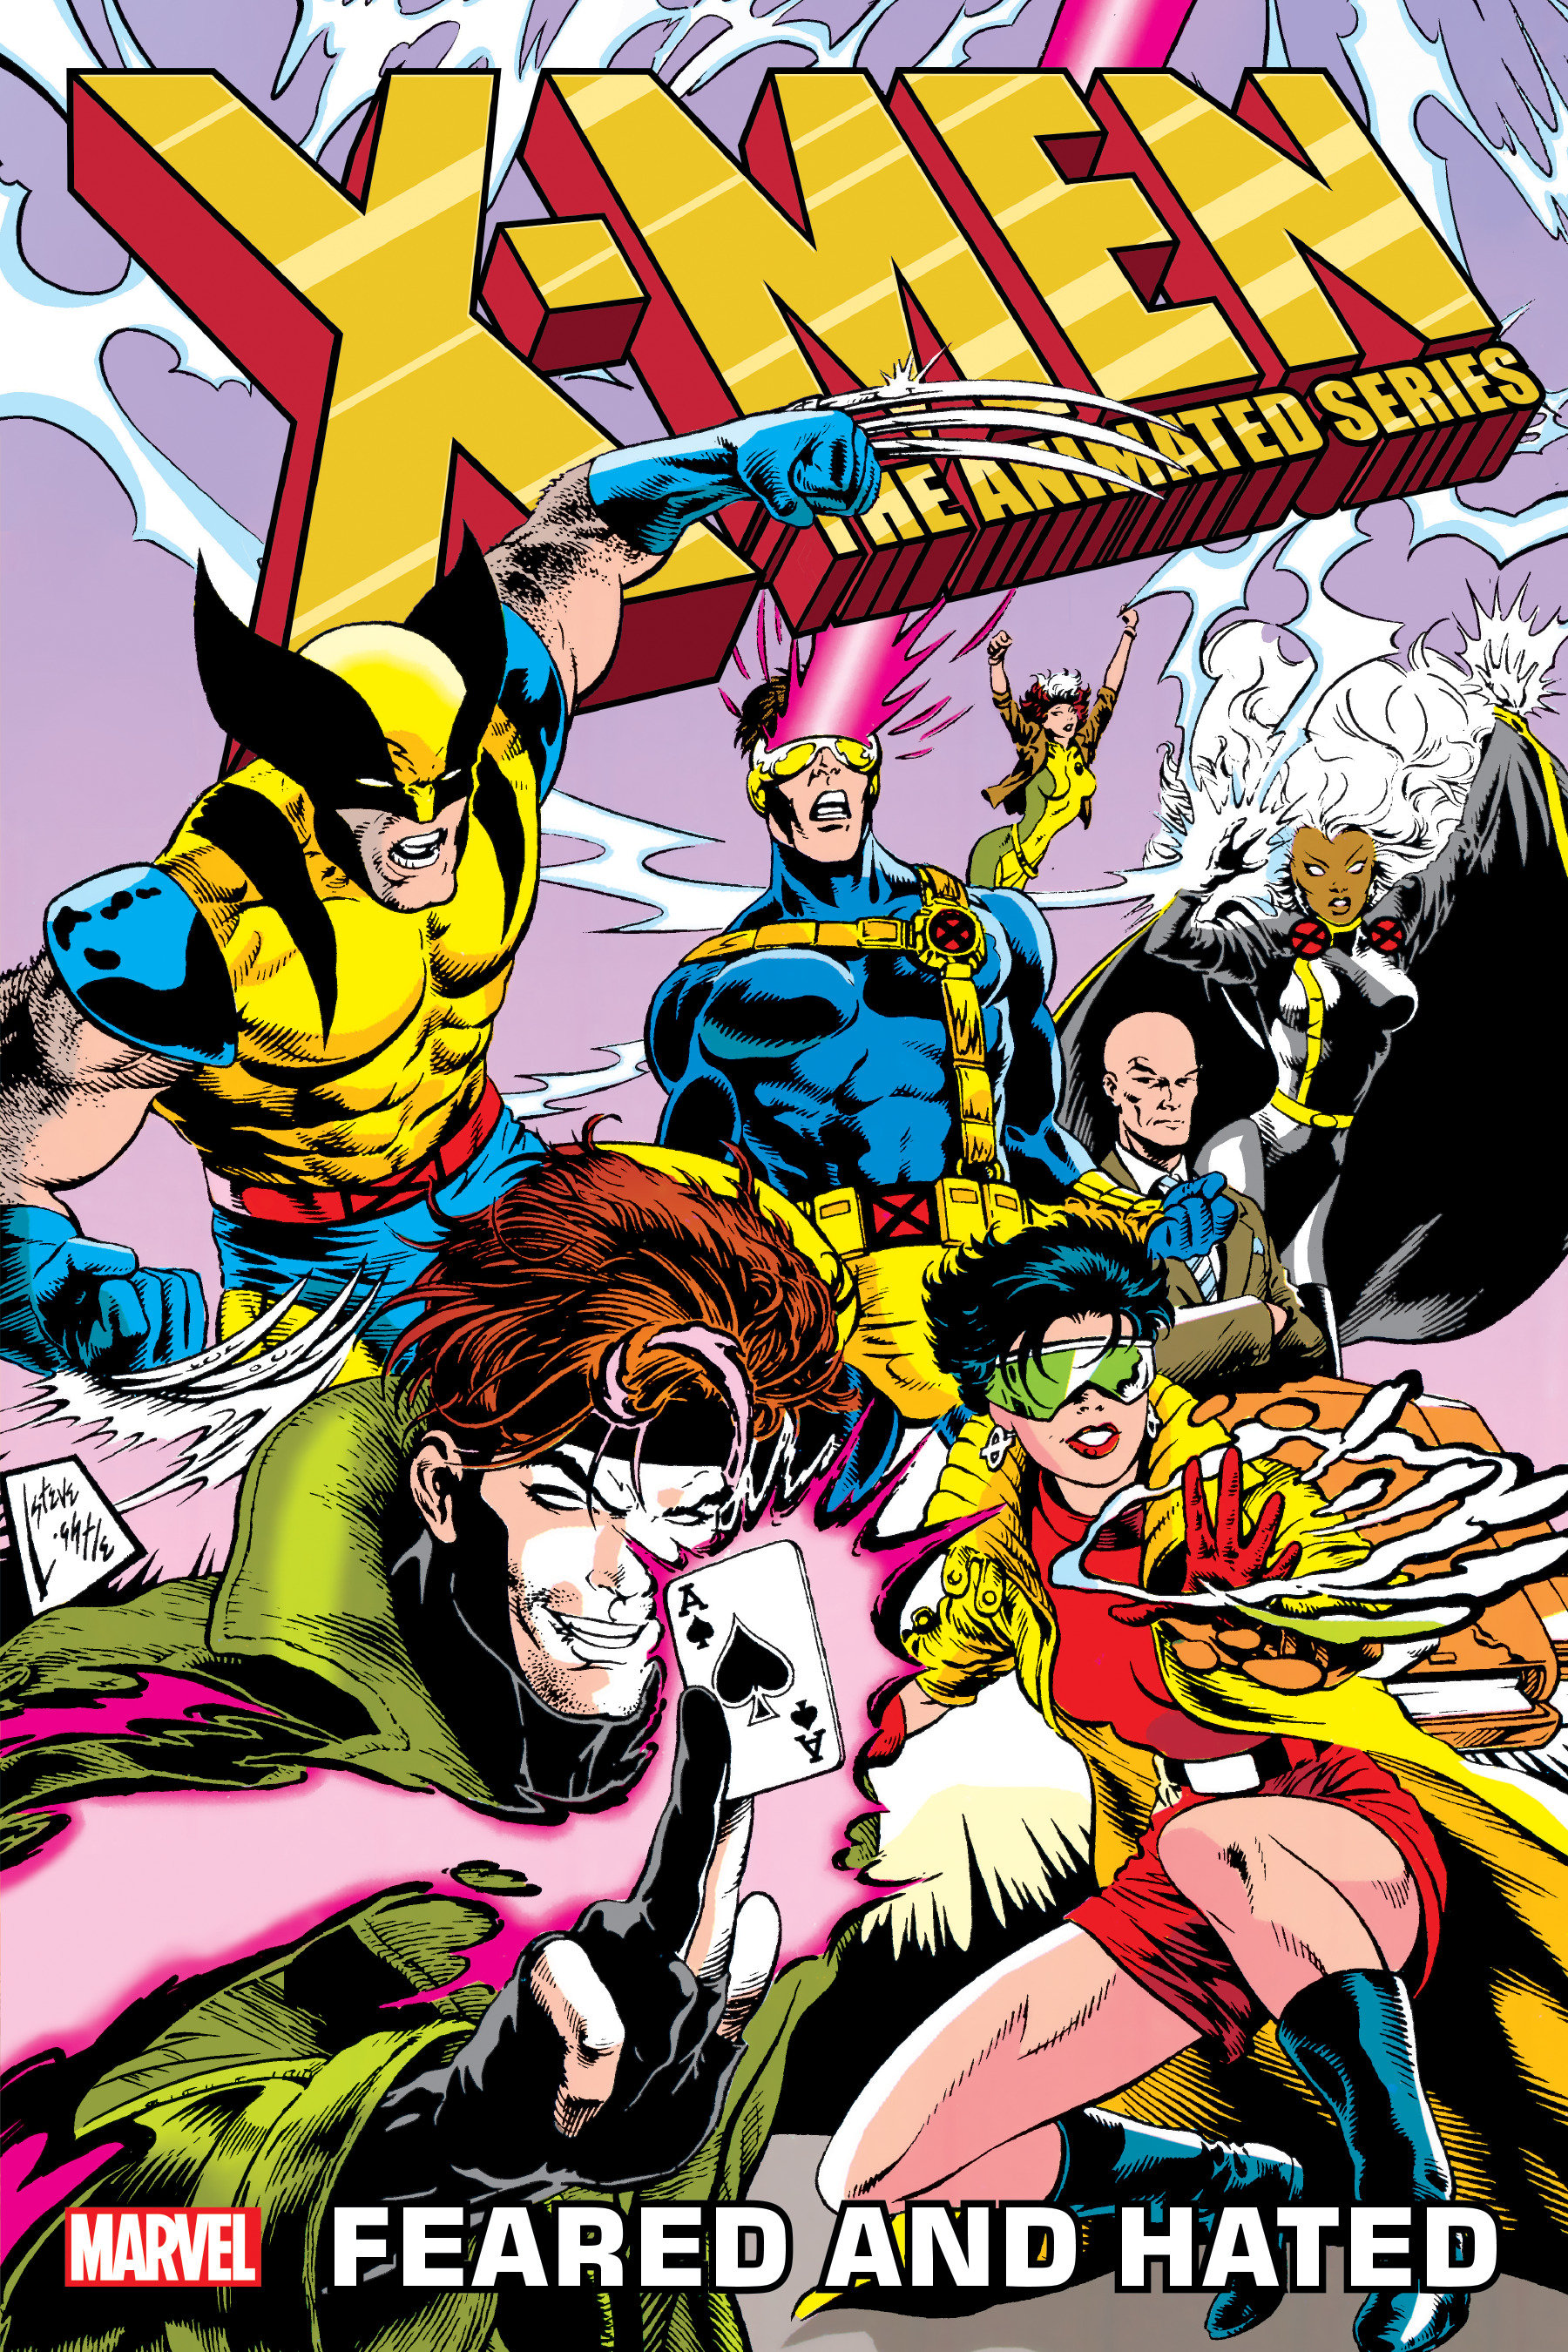 X-Men: The Animated Series - Feared And Hated Graphic Novel